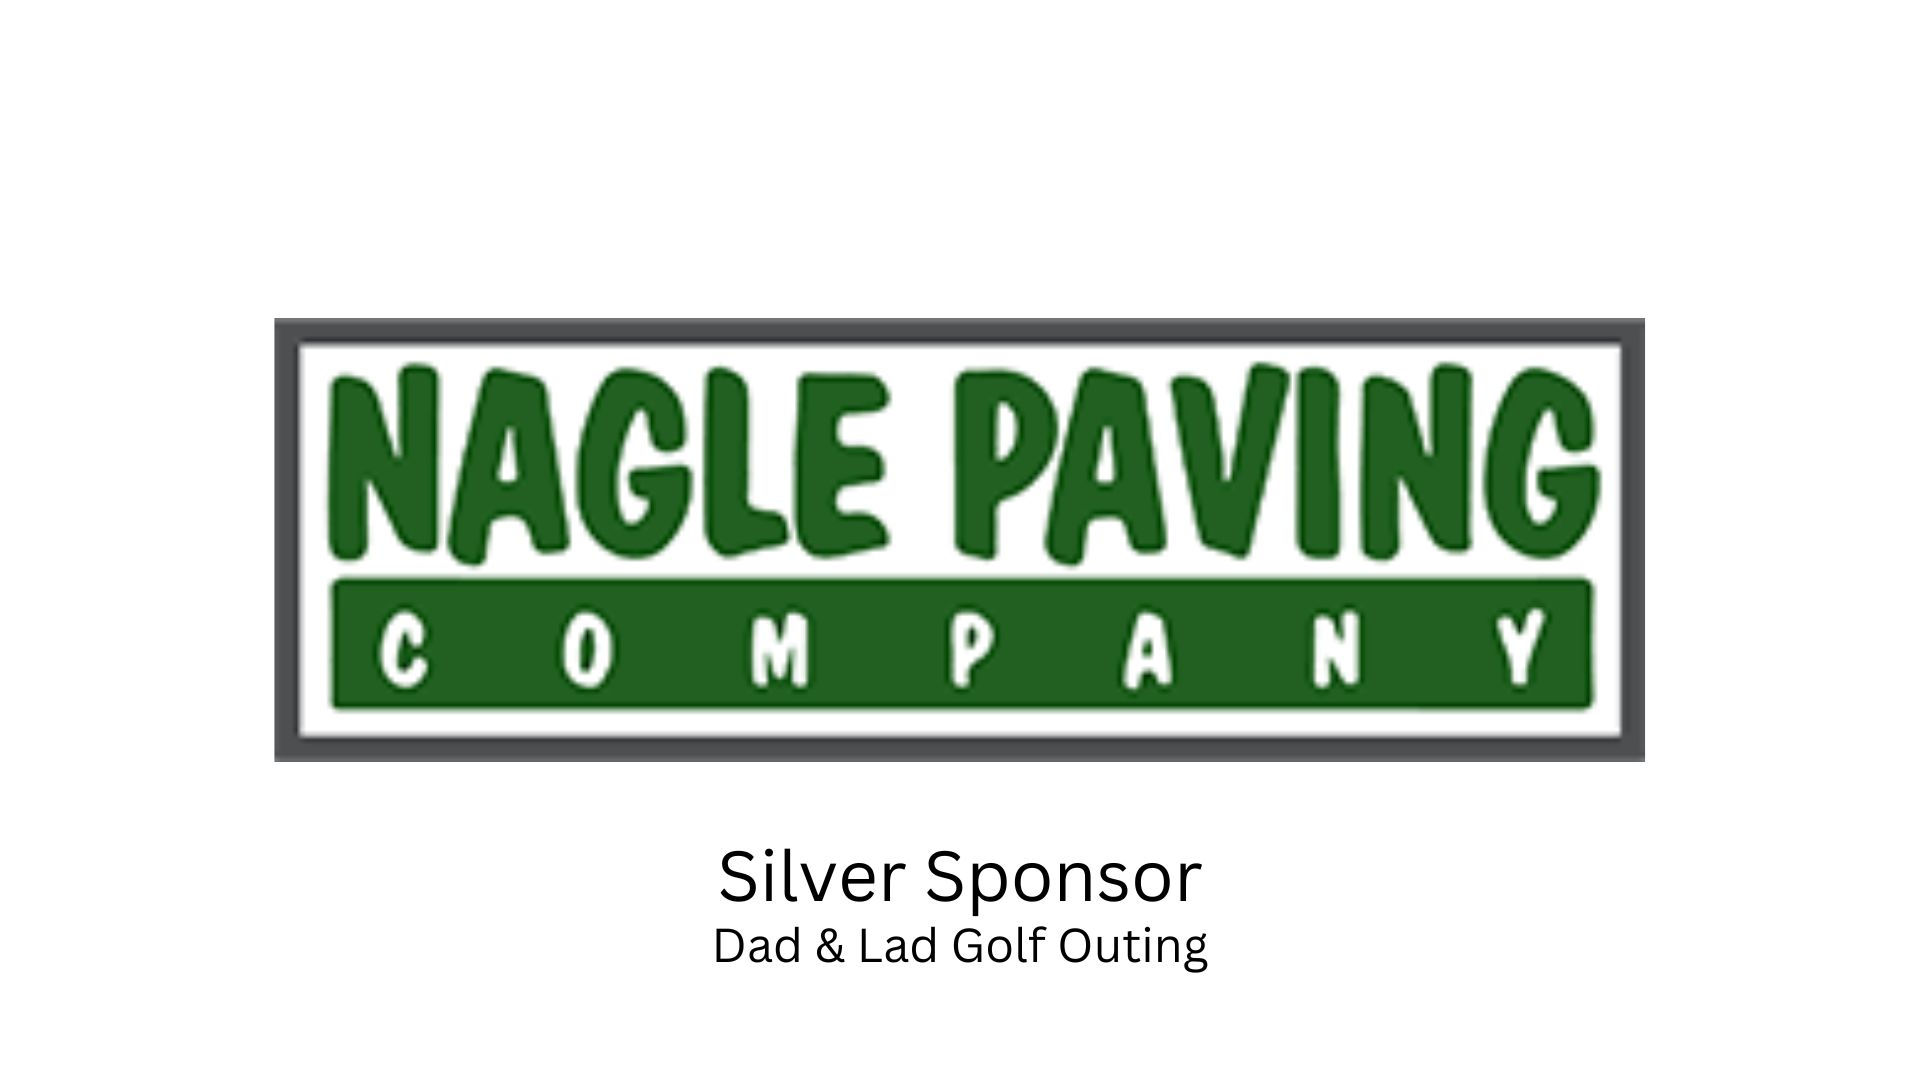 Nagle Paving Company, a Silver Sponsor for the 2022 Dad and Lad Golf Outing